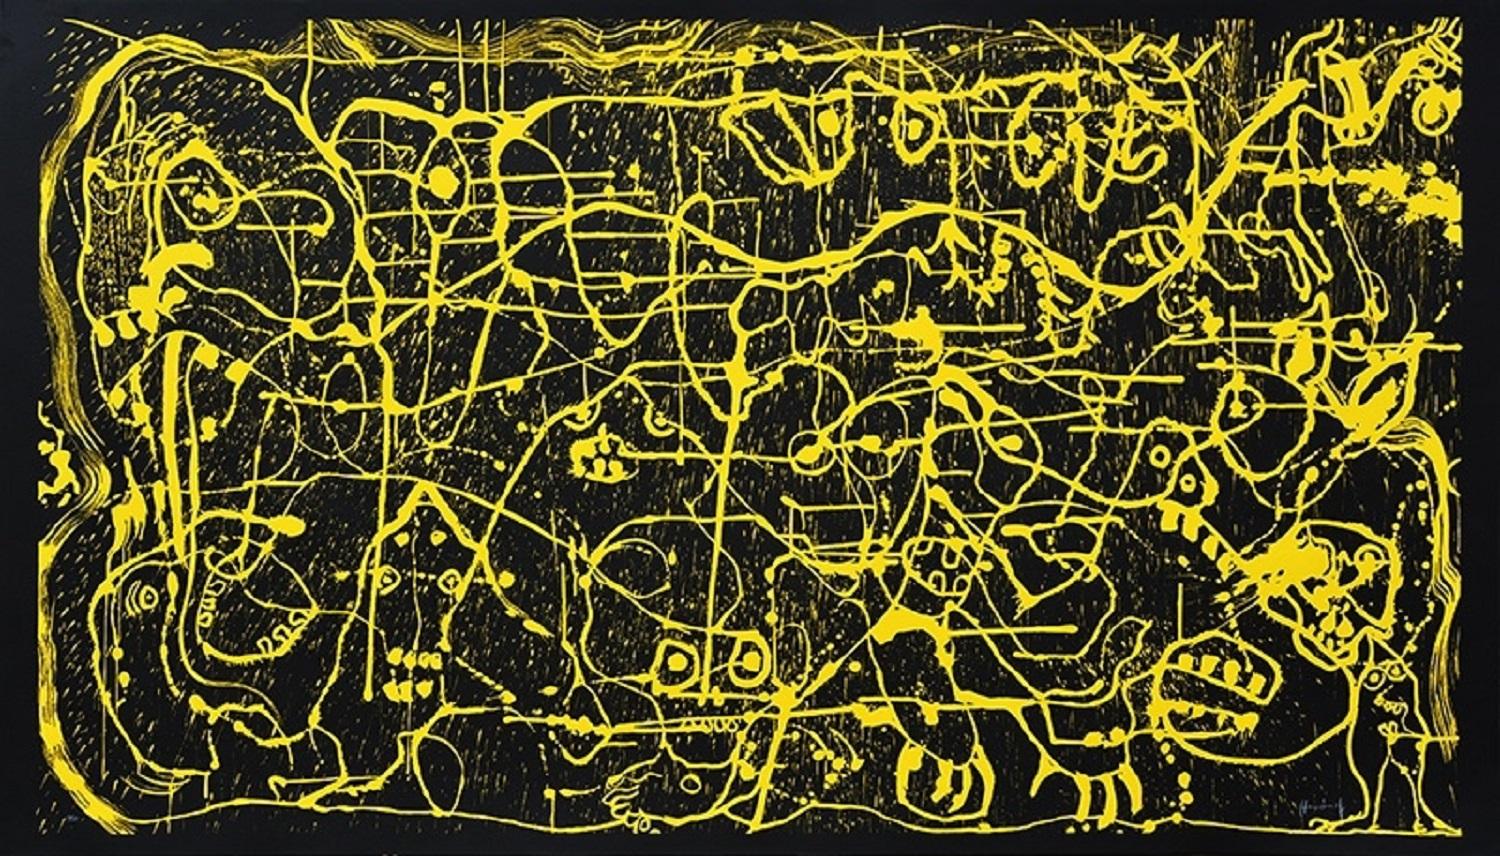 Sergio Hernández (Mexico, 1957)
'Untitled', 2016
woodcut on paper
46.9 x 82.7 in. (119 x 210 cm.)
Edition of 30























